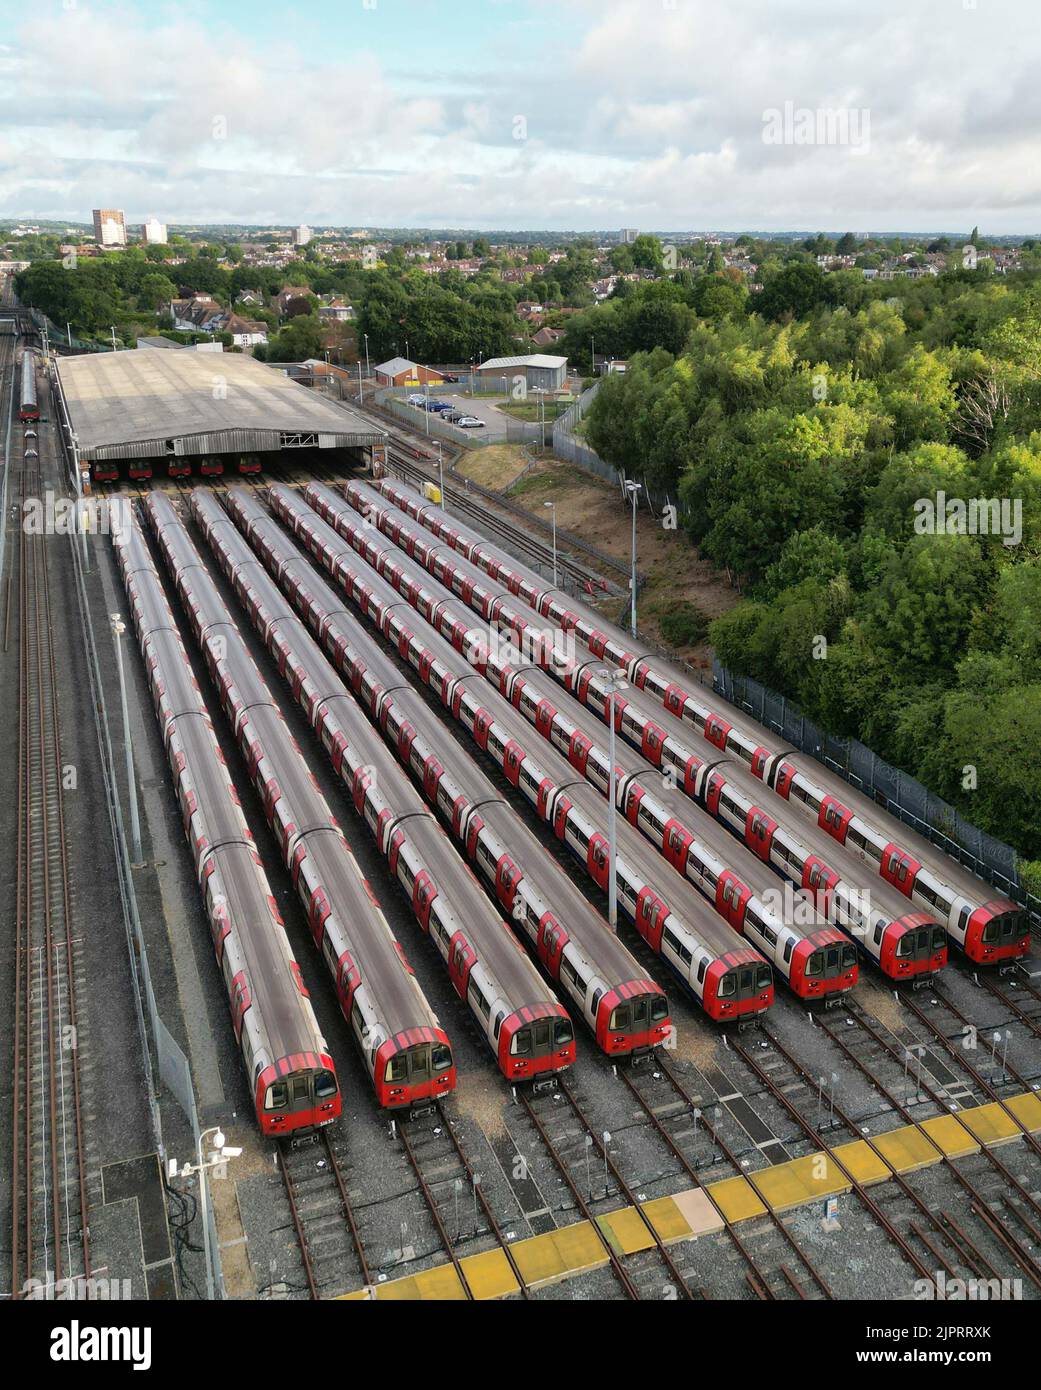 pic shows:  19.8.22 Shed for tube trains between East Finchley and Highgate stations Is full with unused trains as  Tube strike meant most lines were Stock Photo